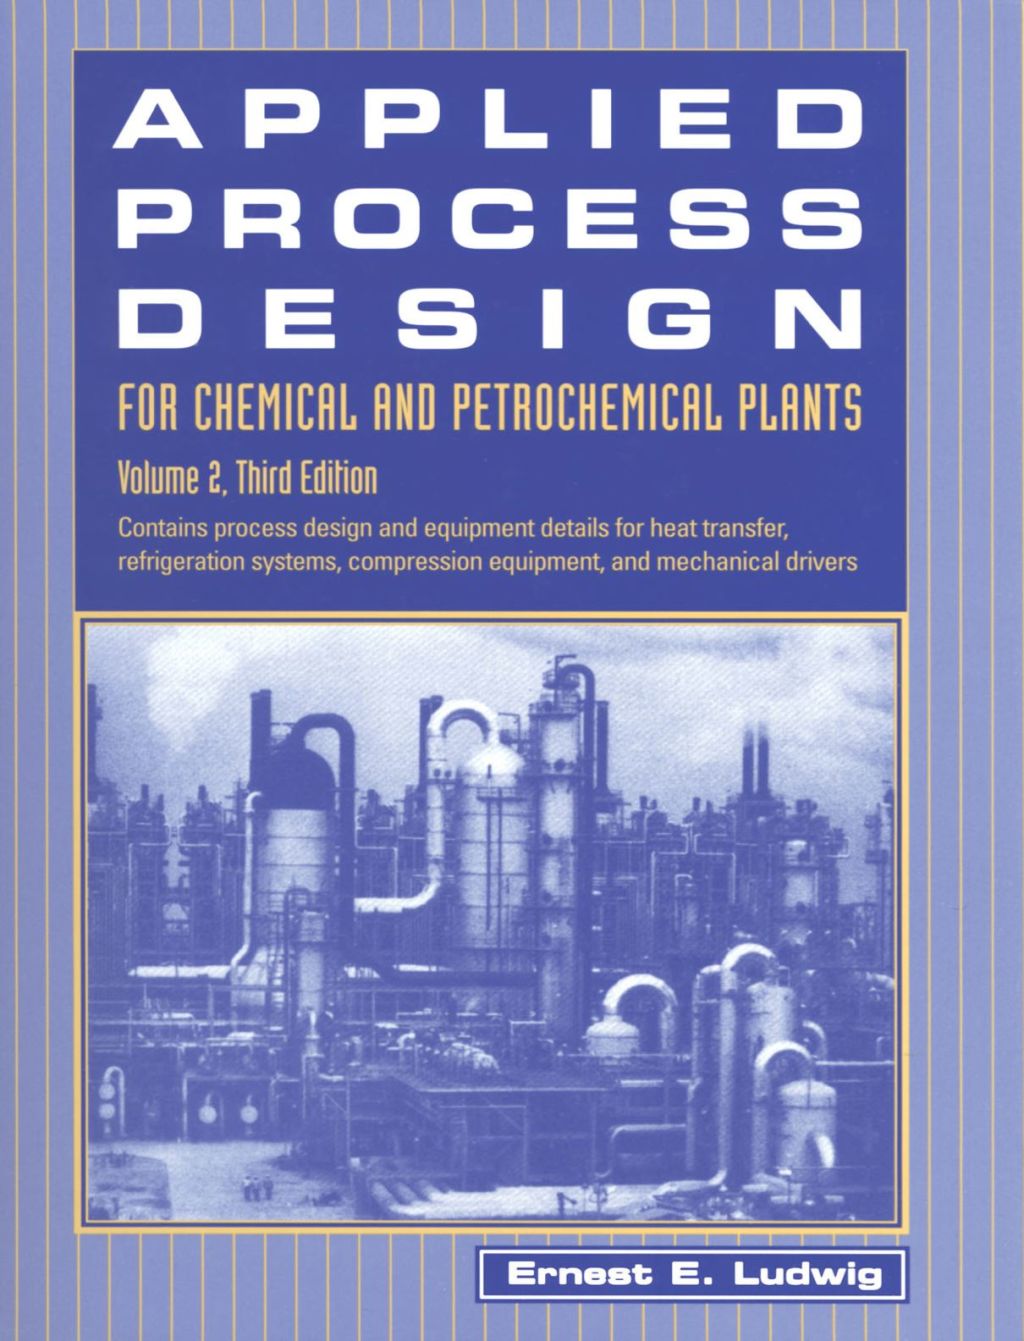 Applied Process Design for Chemical and Petrochemical Plants: Volume 2: Volume 2 - 3rd Edition (eBook)